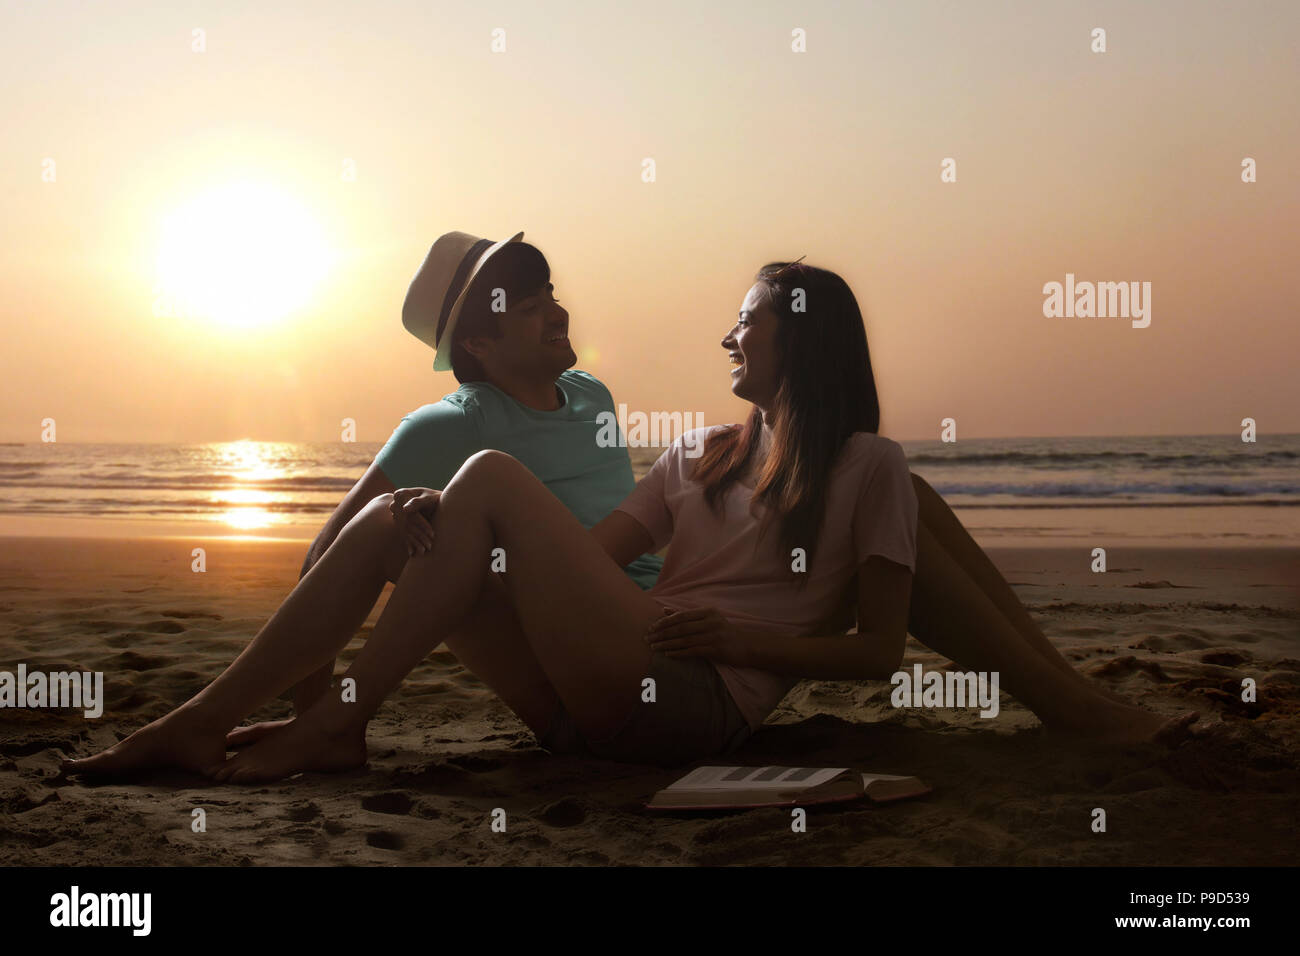 Smiling young couple sitting on beach at sunset Banque D'Images